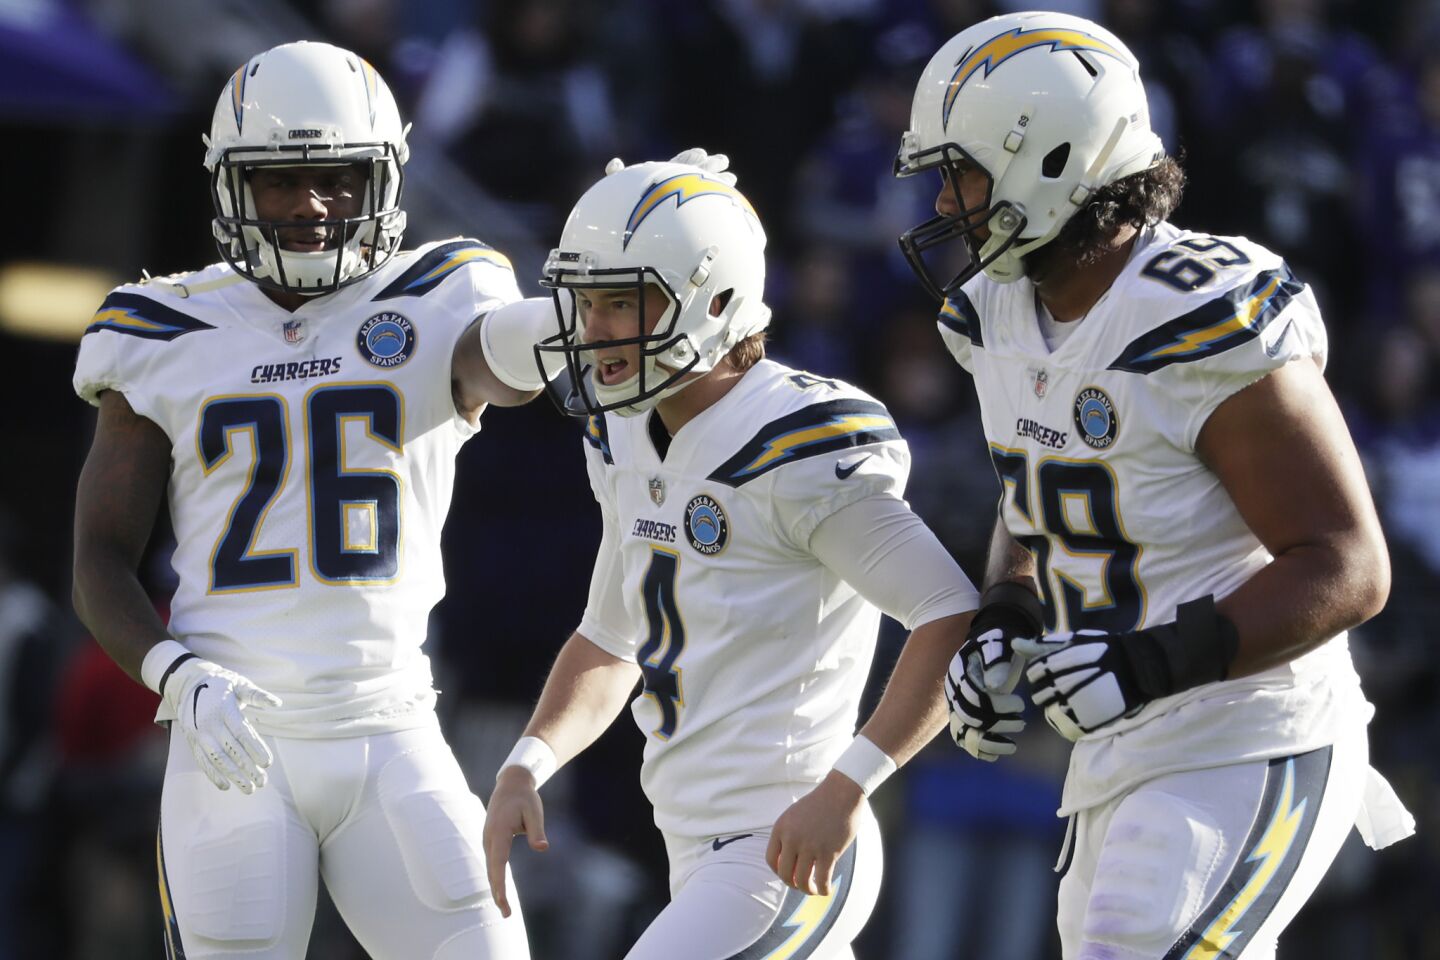 Chargers kicker Michael Badgley celebrates with teammates Casey Hayward Jr., left, and Sam Tevi after converting a 53-yard field goal during the first quarter.